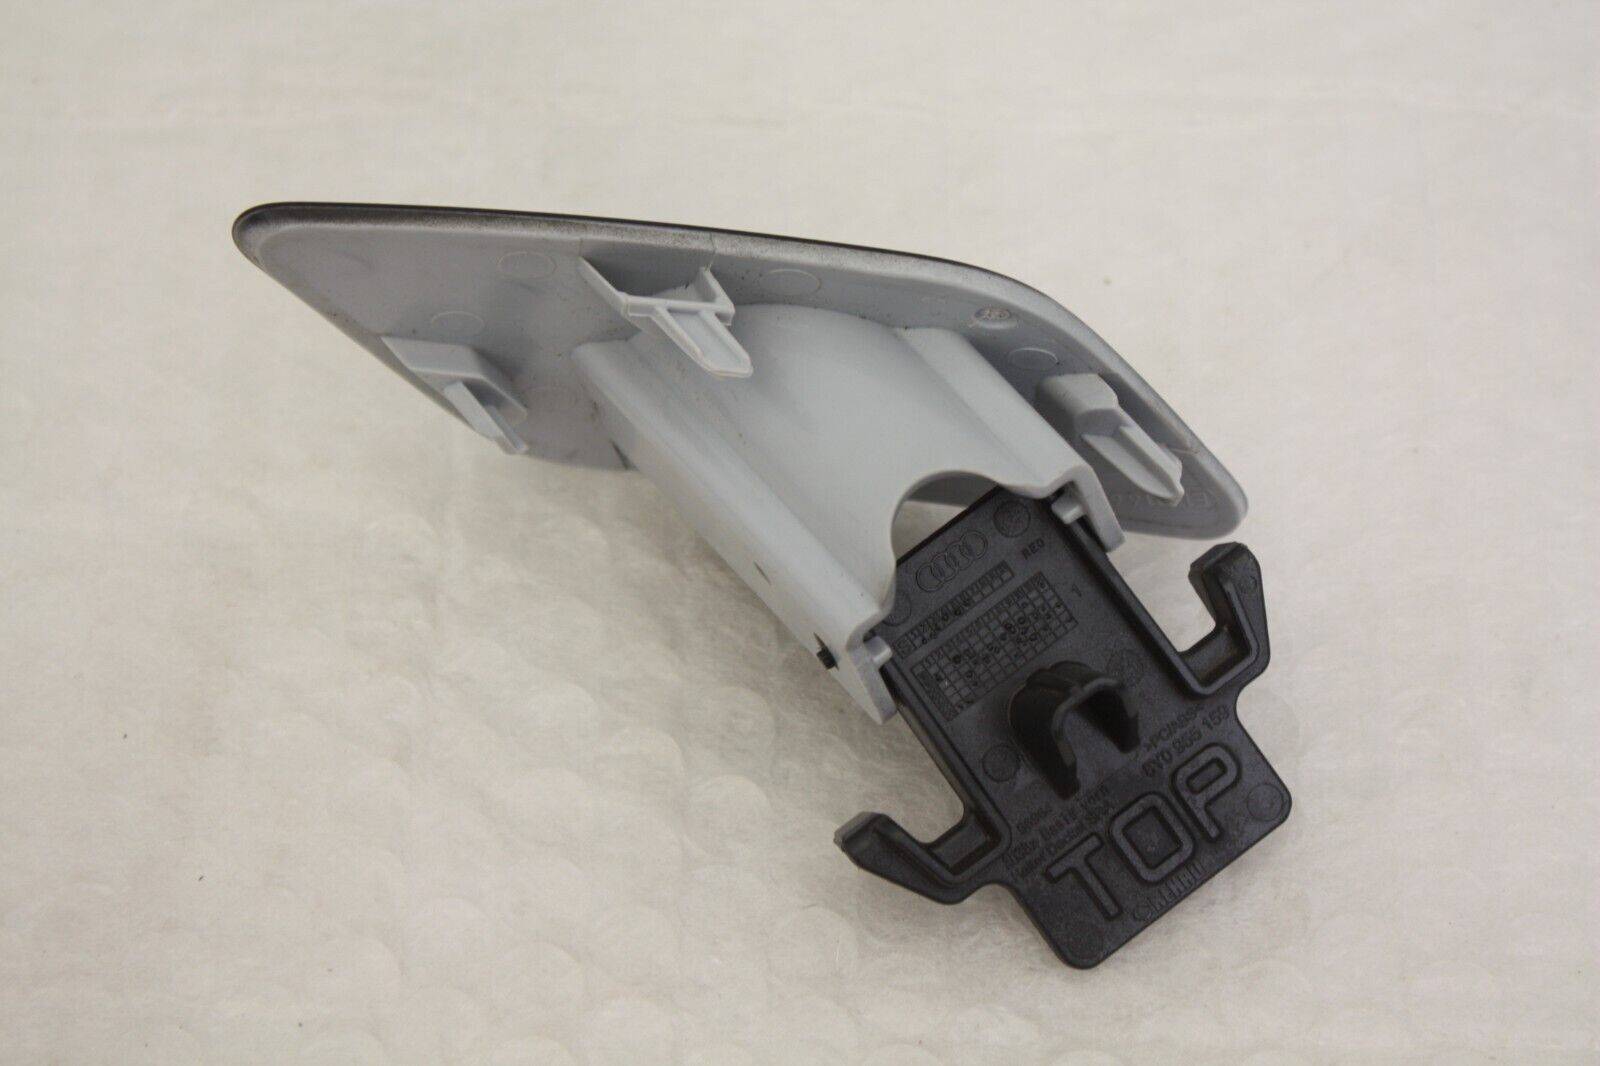 Audi-A3-Front-Bumper-Left-Side-Washer-Cover-8Y0955275-Genuine-176309387399-3